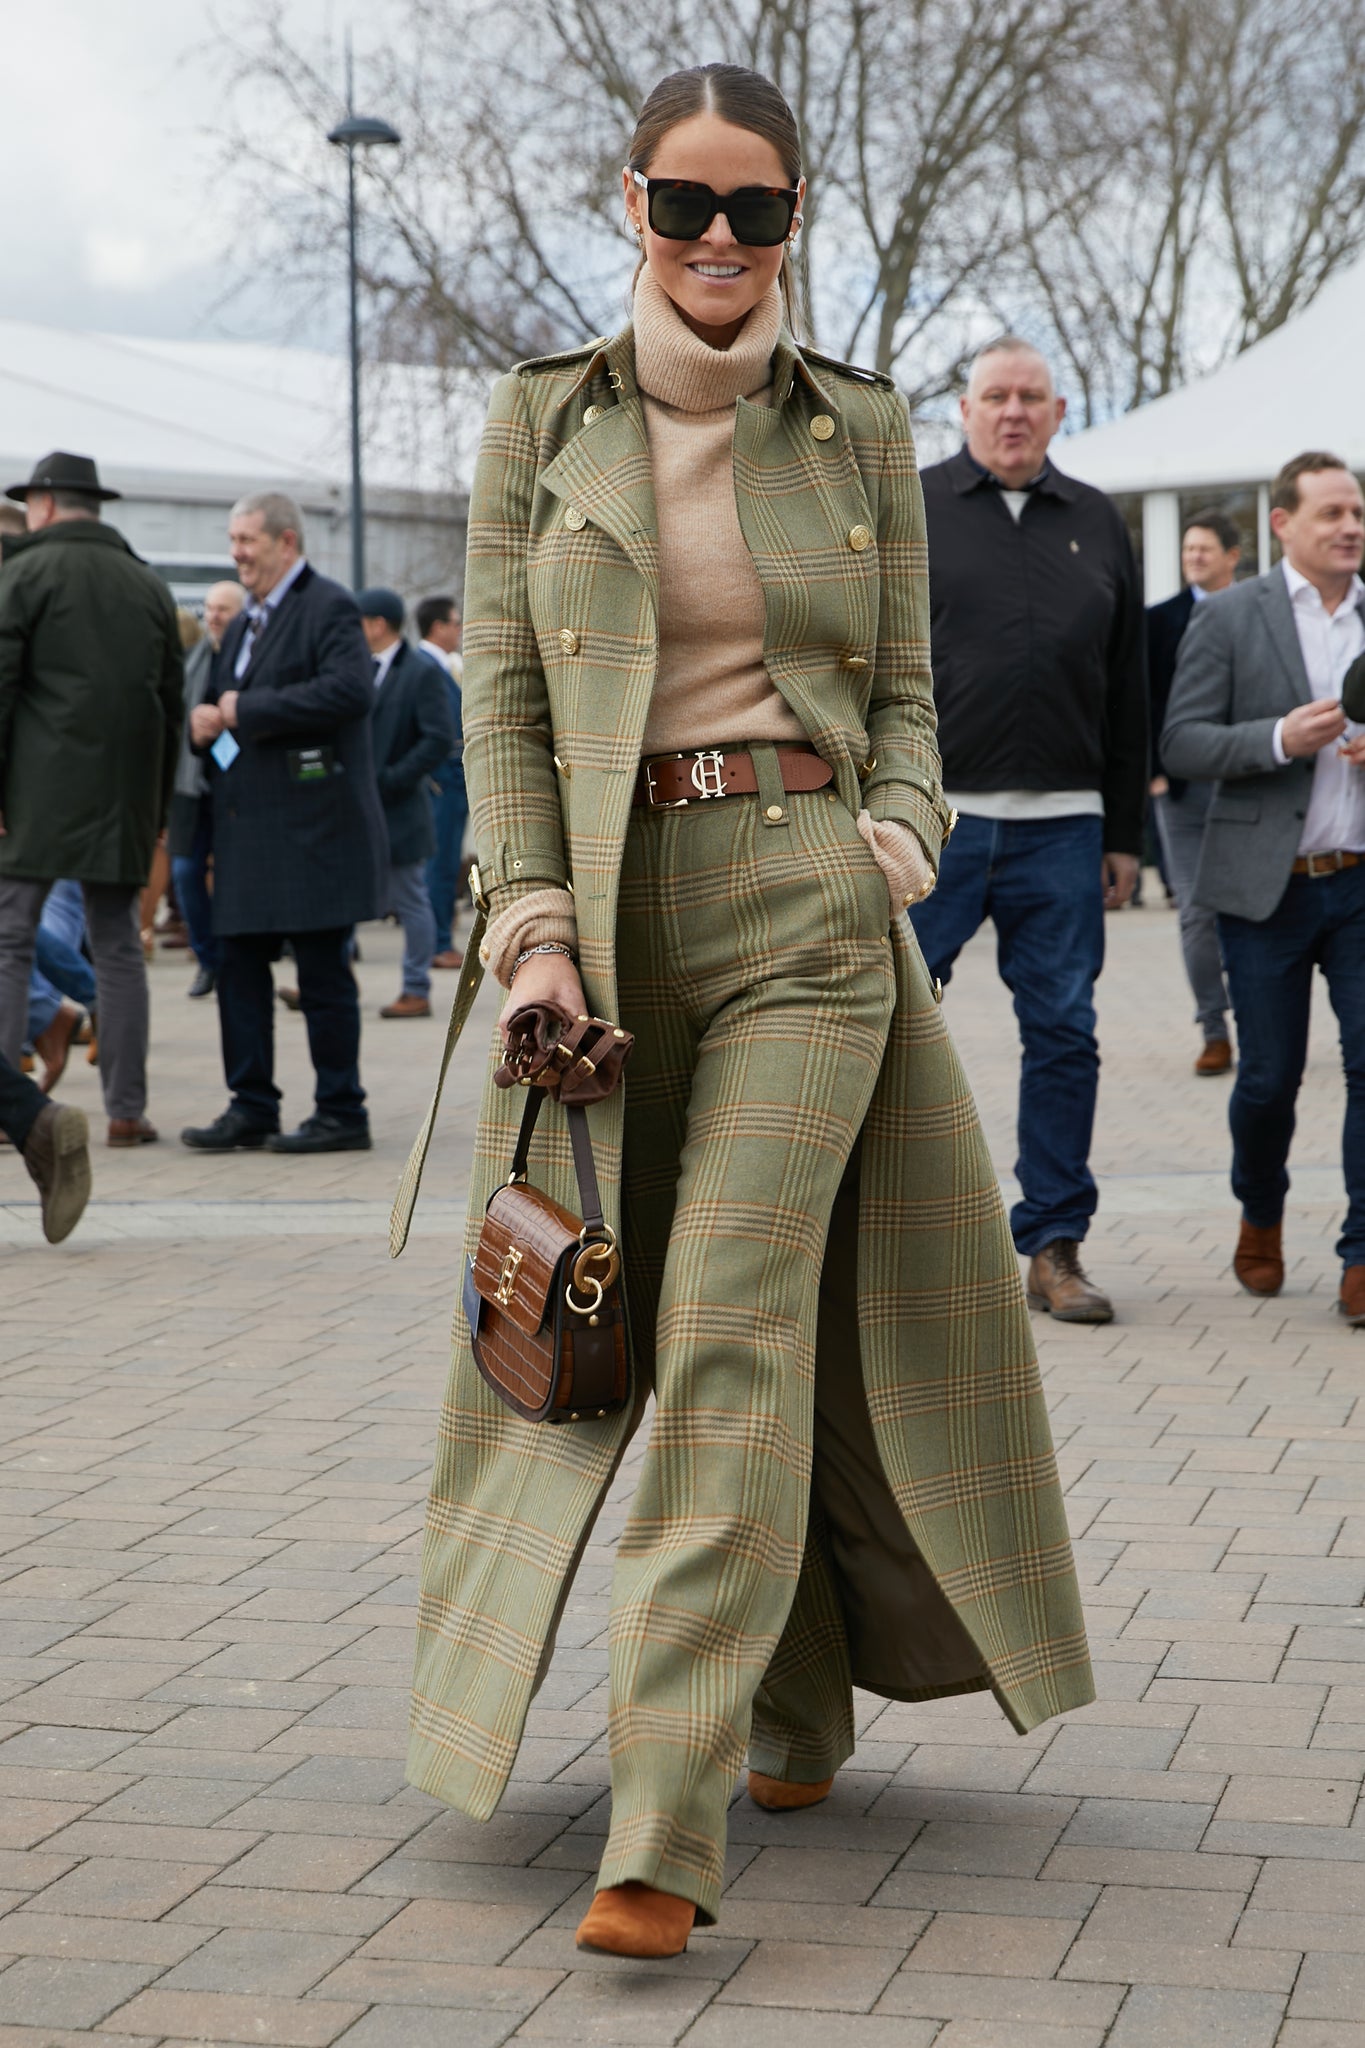 Women's leveret wool high waisted straight trousers with camel roll neck top, tan belt and leveret full length  trench coat, black sunglasses and tan croc handbag